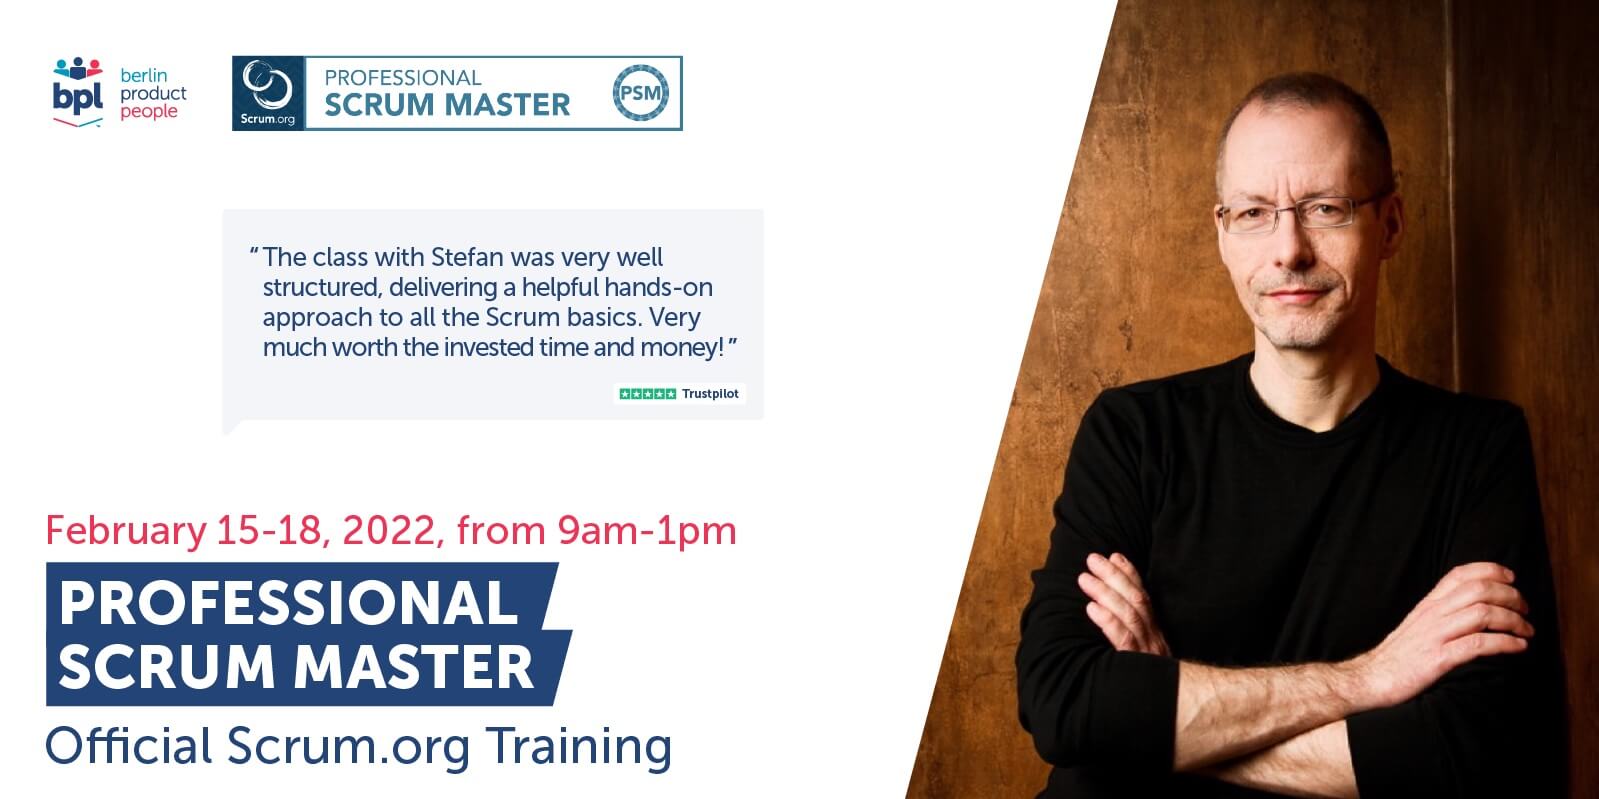 Professional Scrum Master Online Training w/ PSM I Certificate: February 15-18, 2021 — Berlin Product People GmbH